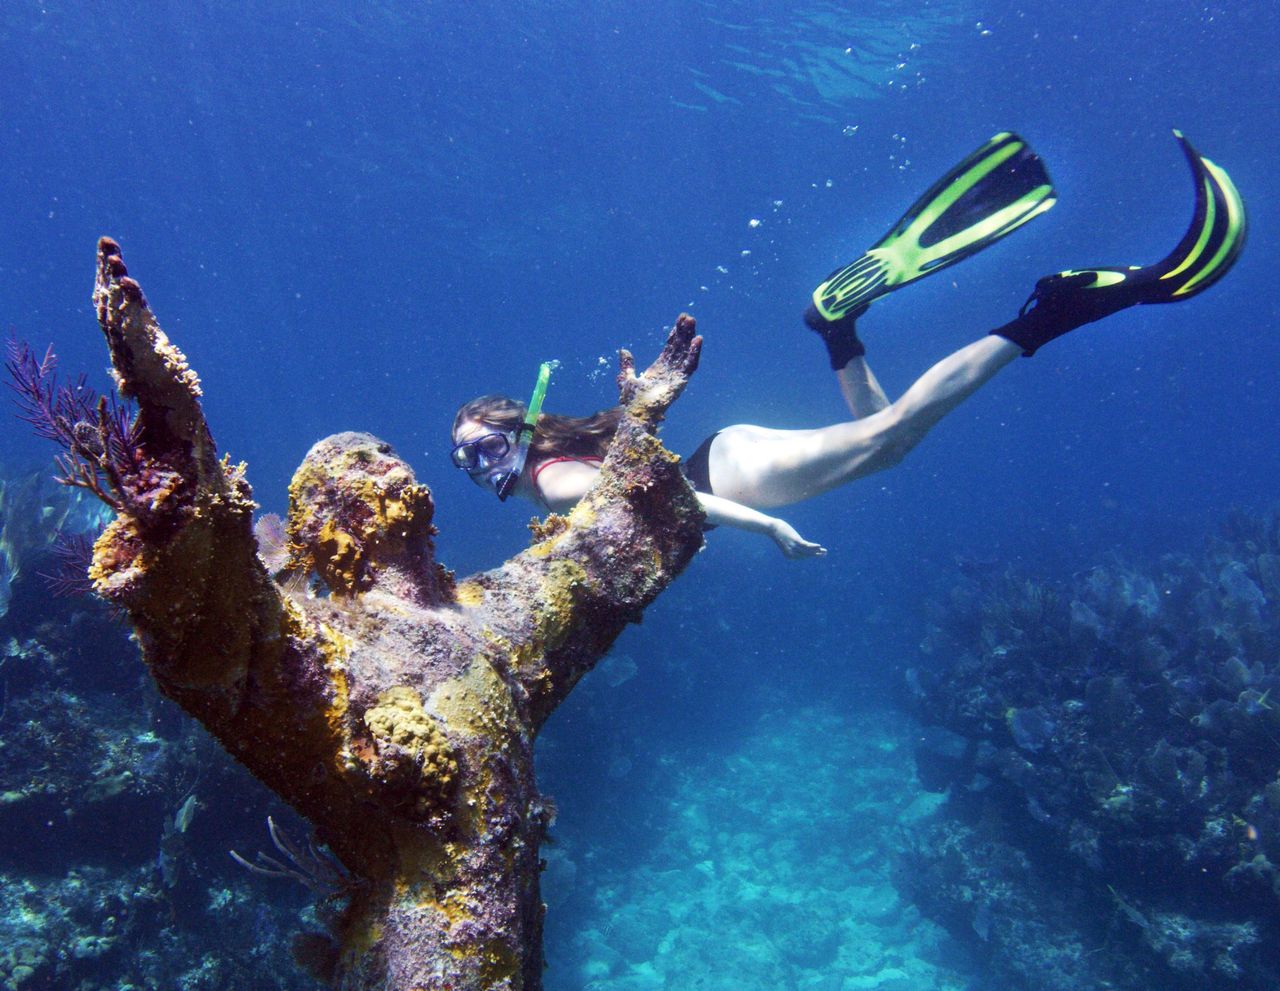 The magnificent Christ of the Deep statue stands in 25 feet of water at Key Largo Dry Rocks. Photo: Stephen Frink